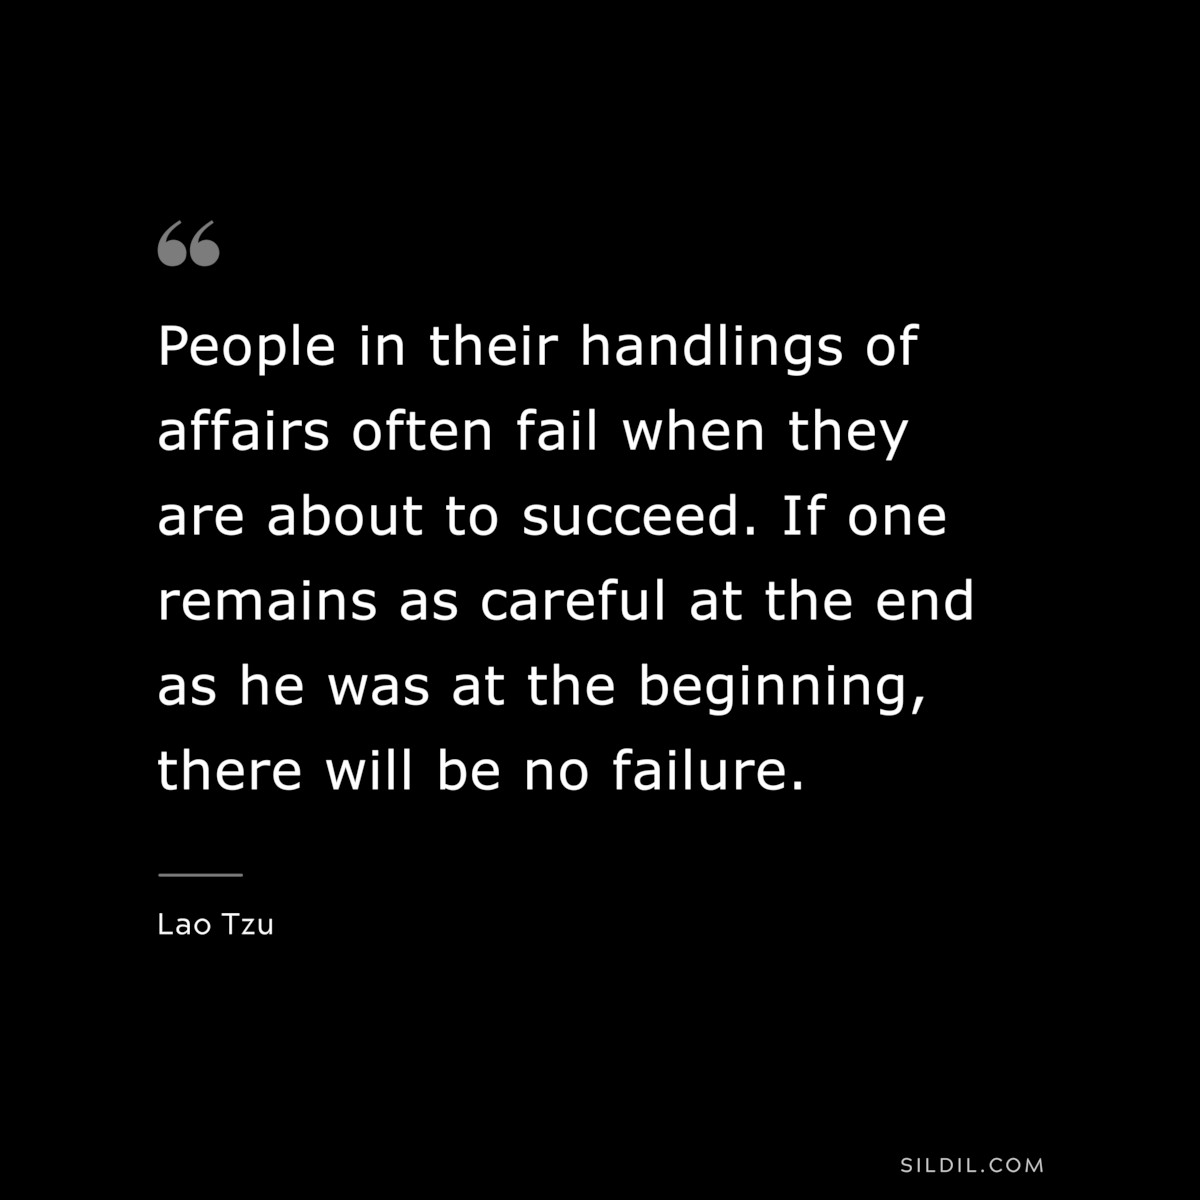 People in their handlings of affairs often fail when they are about to succeed. If one remains as careful at the end as he was at the beginning, there will be no failure. ― Lao Tzu